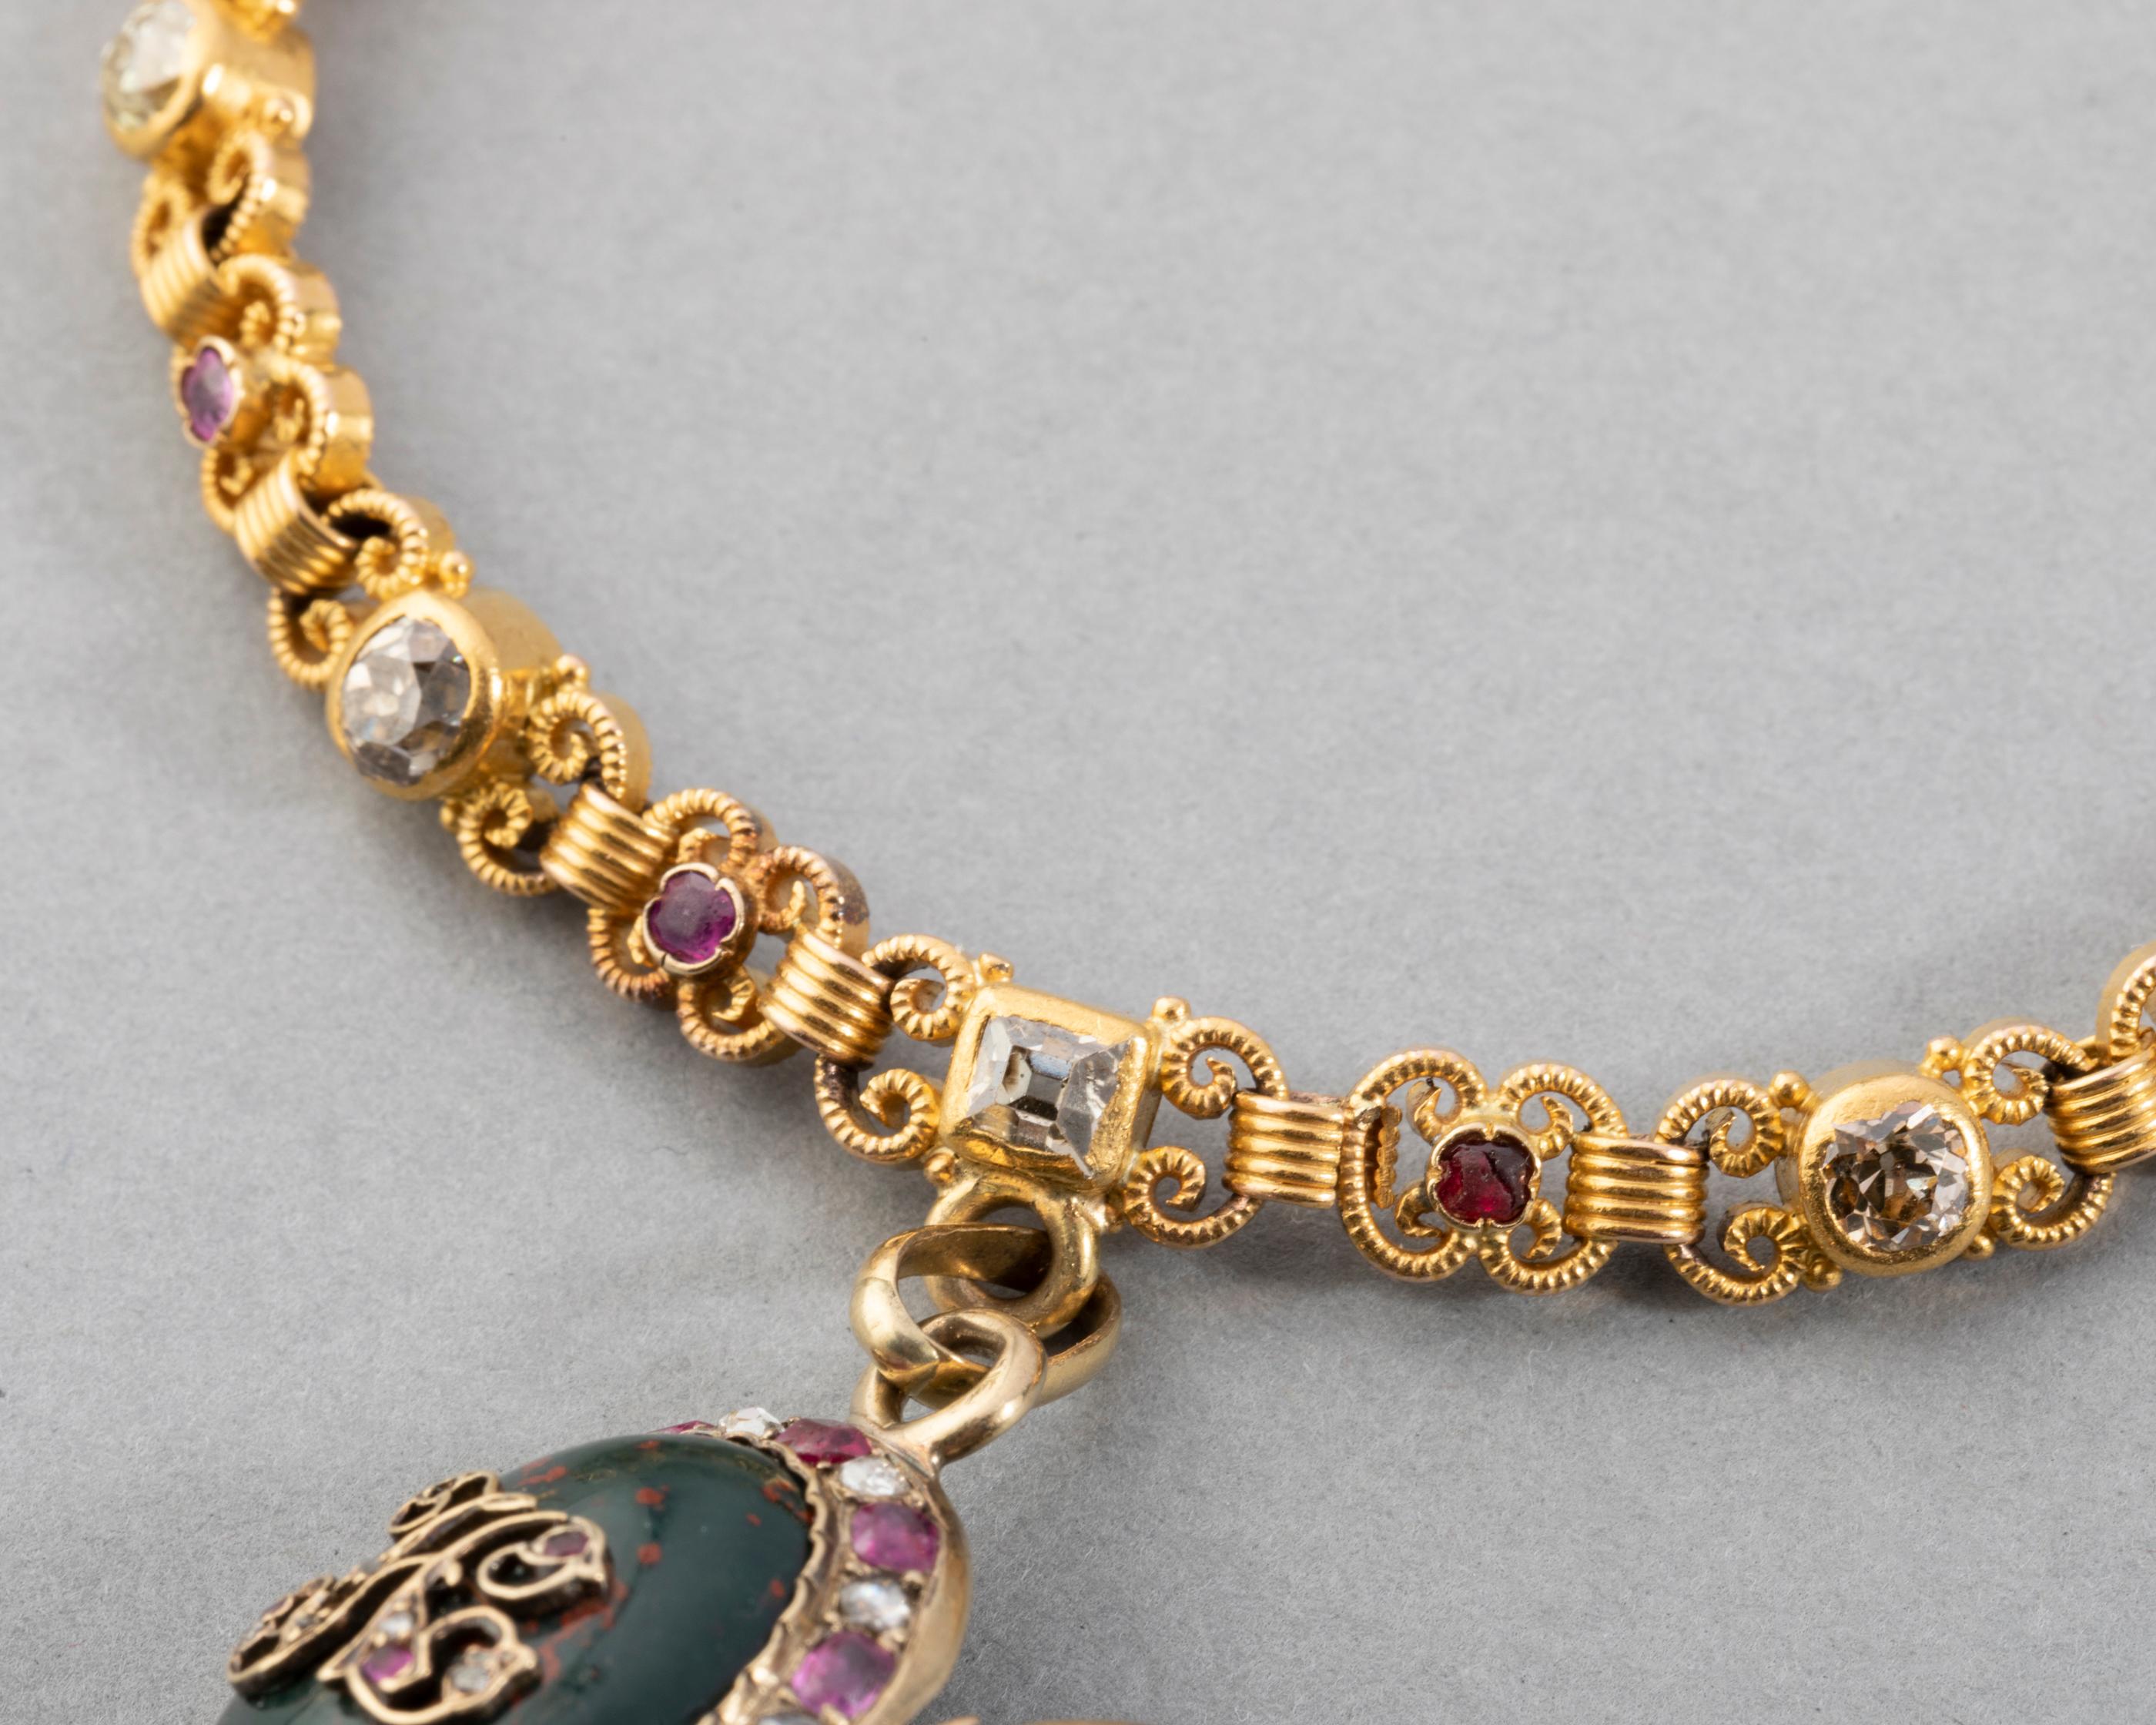 Women's Antique 19th Century Gold and Precious Stones French Bracelet